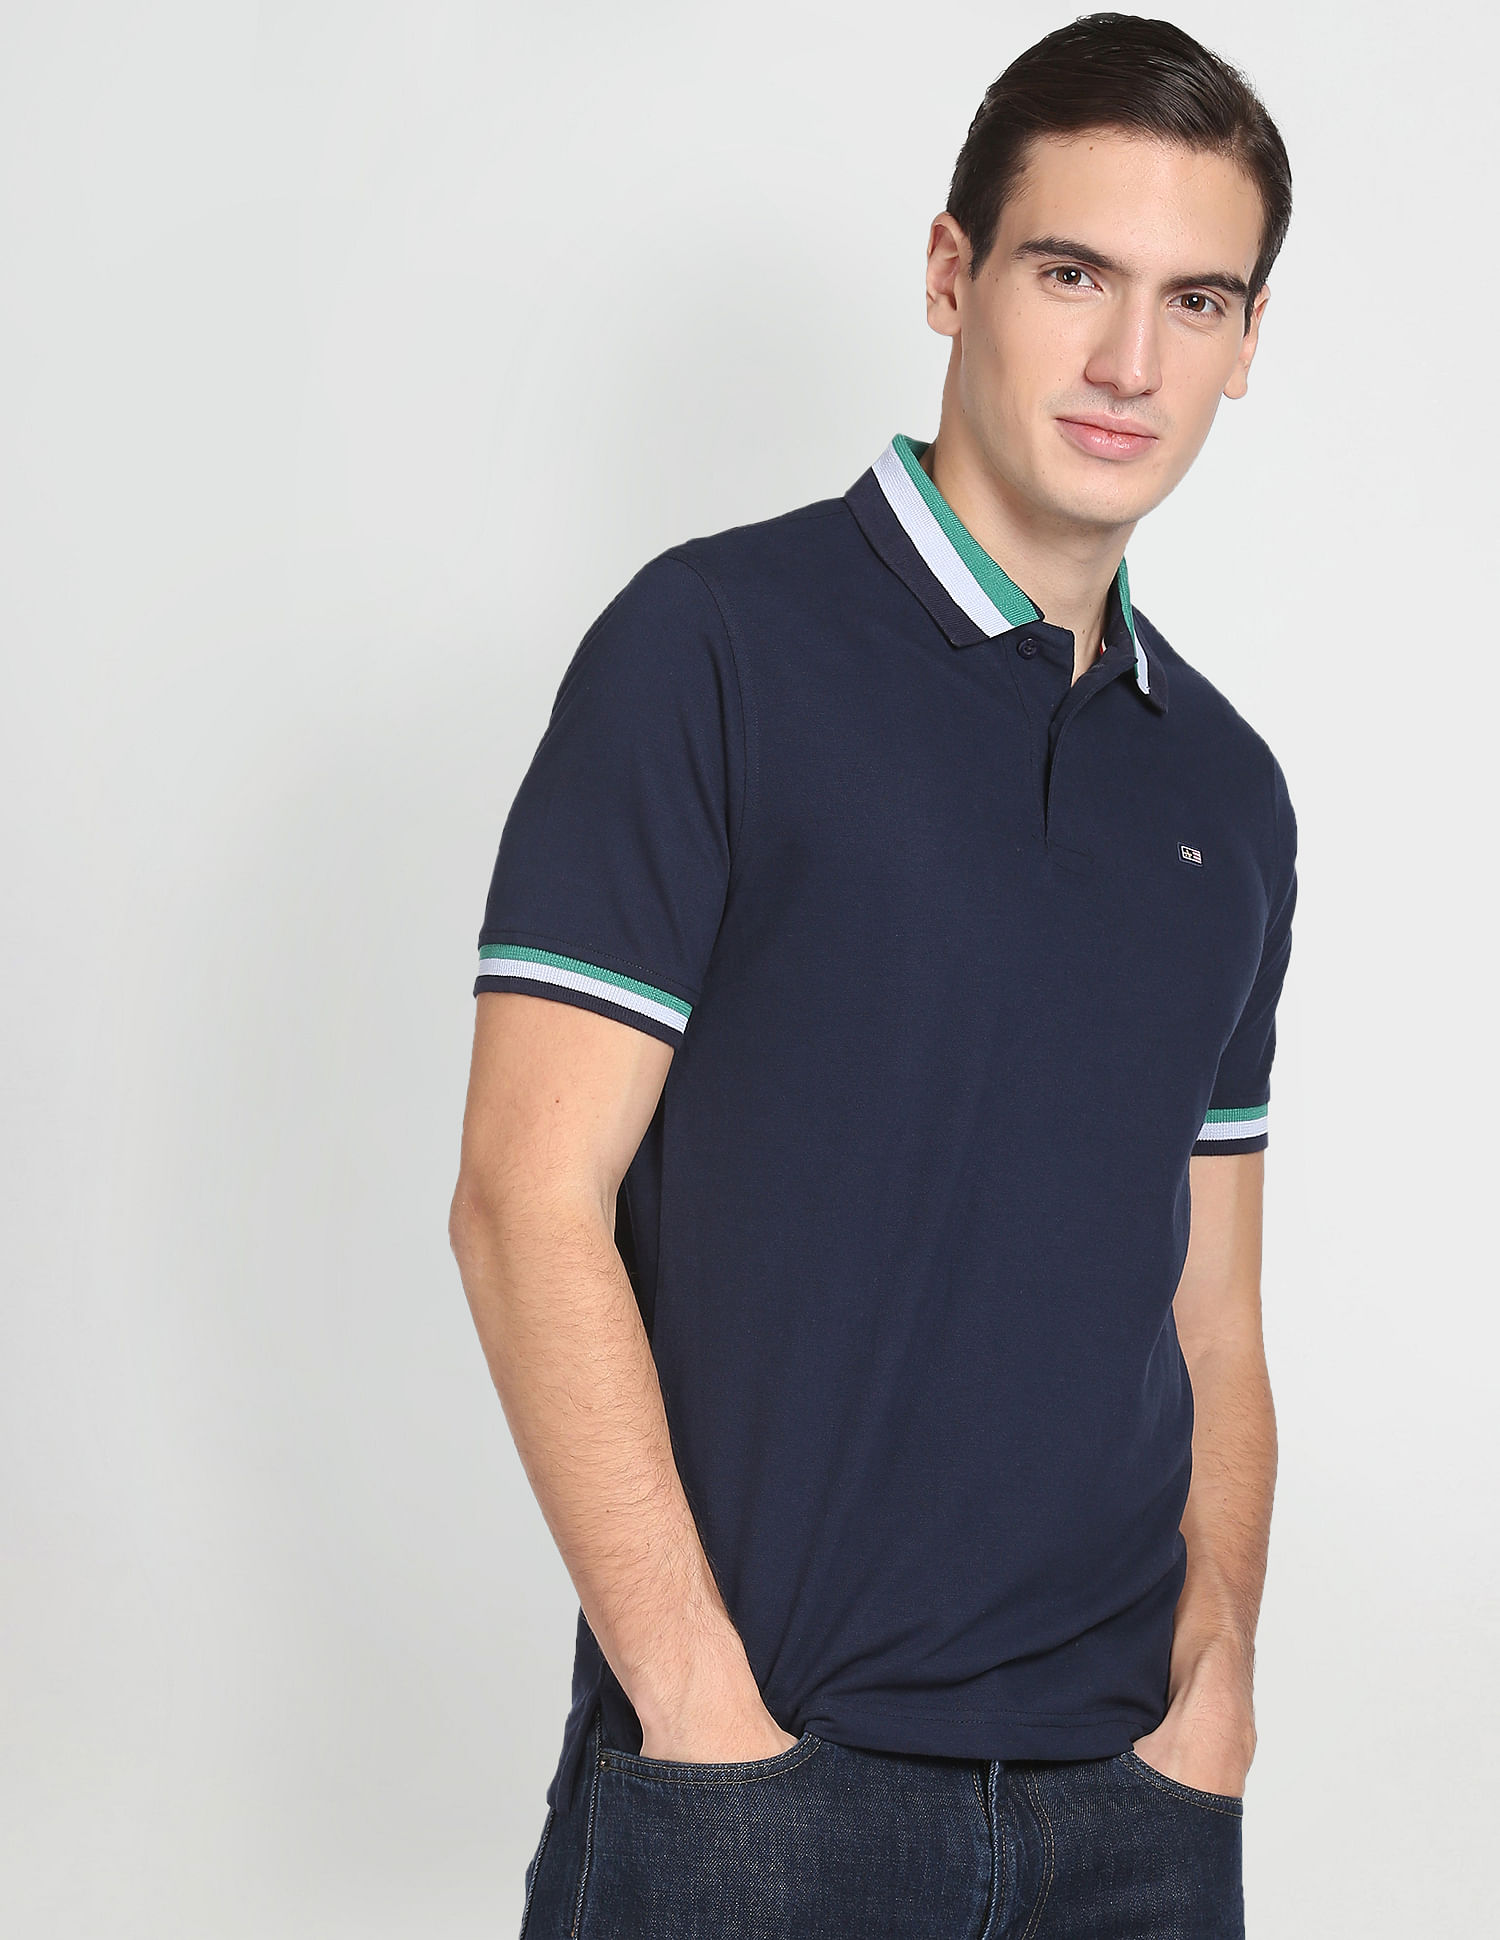 Arrow Sports Clothing – Buy Arrow Sports Clothes Online in India - NNNOW